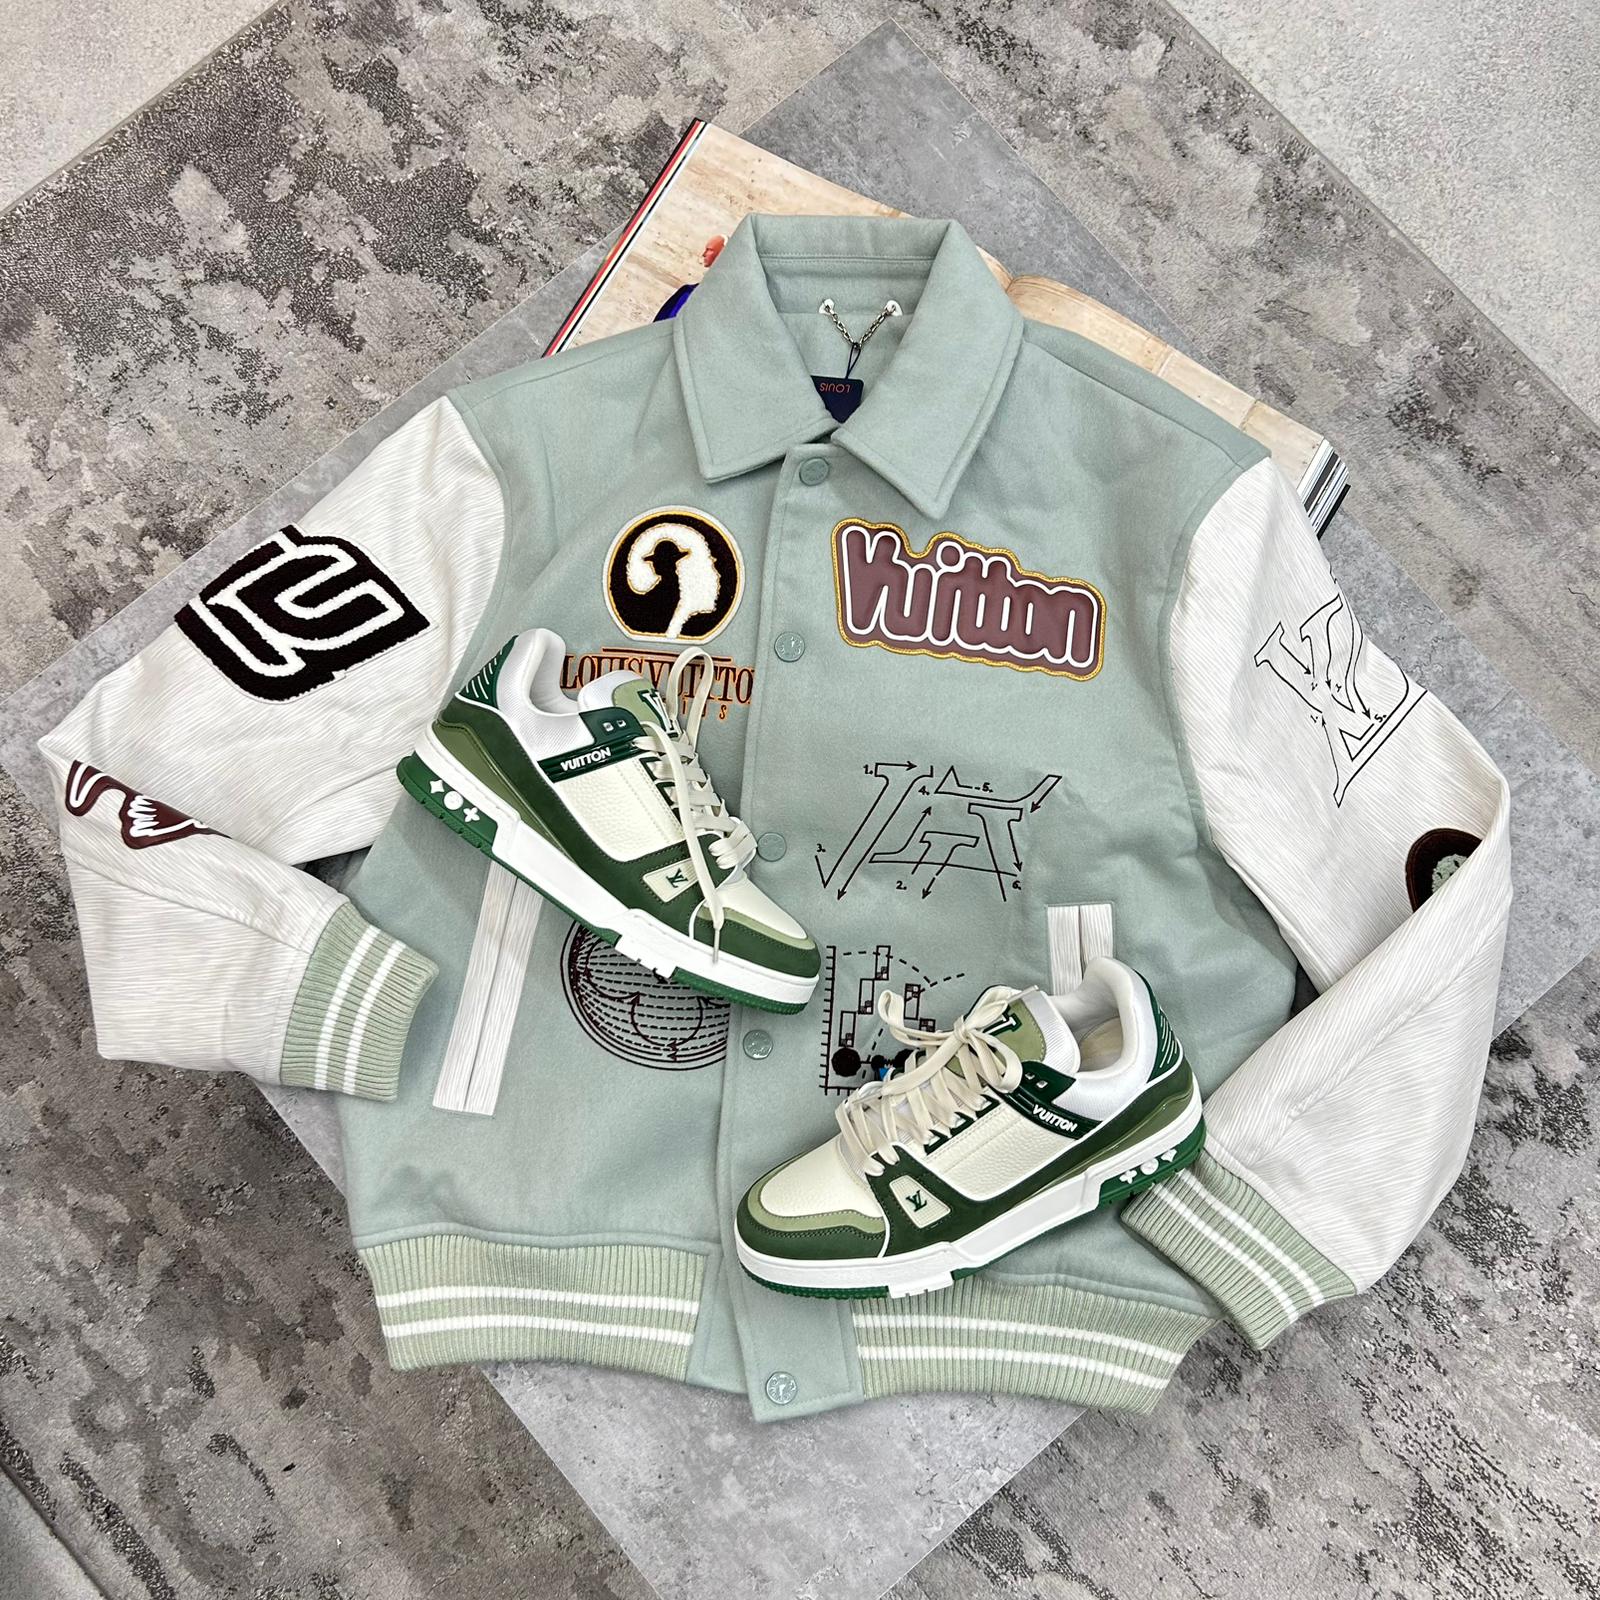 LOUIS VUITTON - TRAINERS - GREEN/WHITE